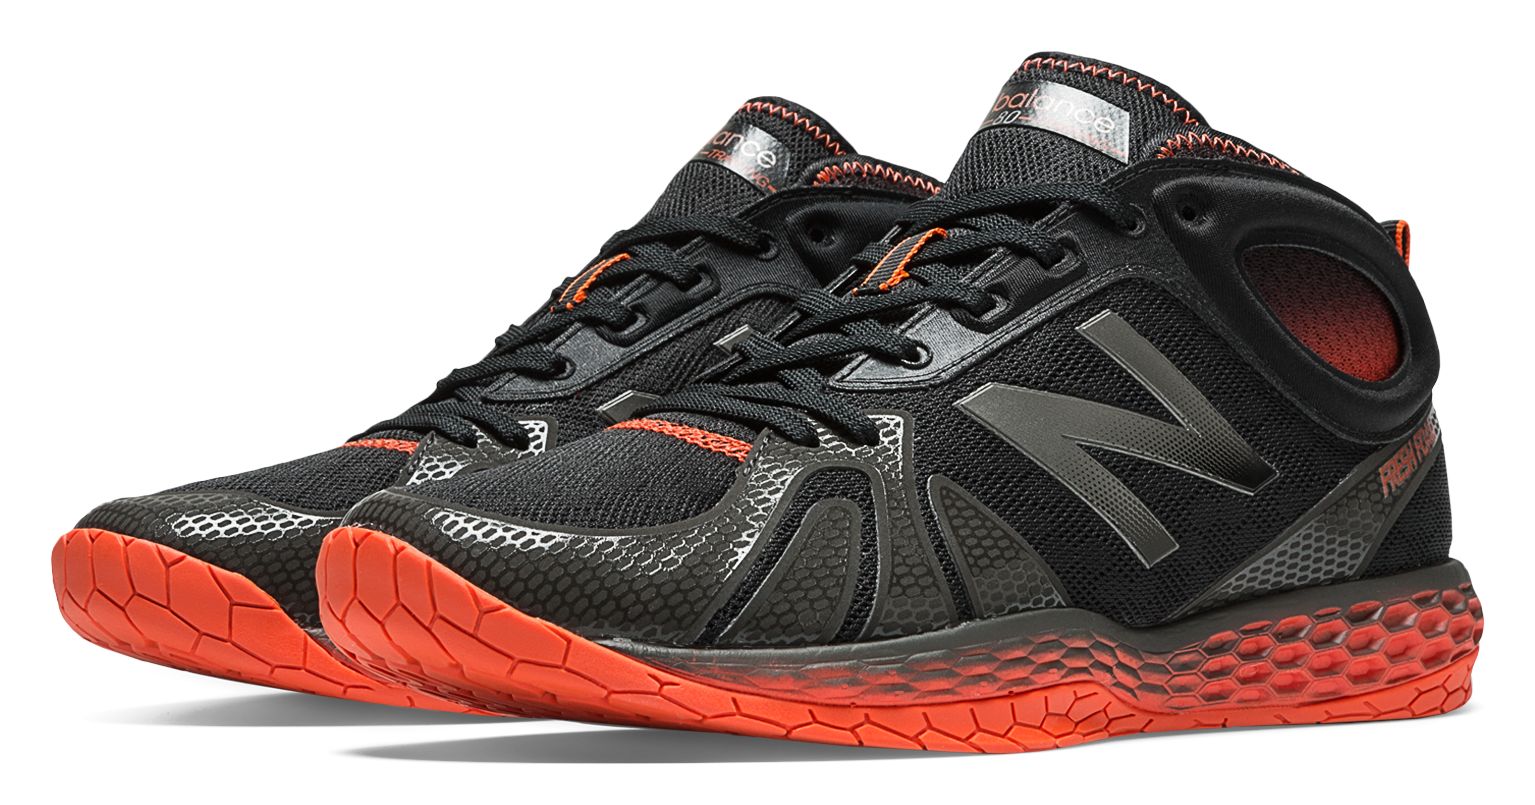 New Balance MX80 on Sale - Discounts Up to 20% Off on MX80GR at Joe's New  Balance Outlet